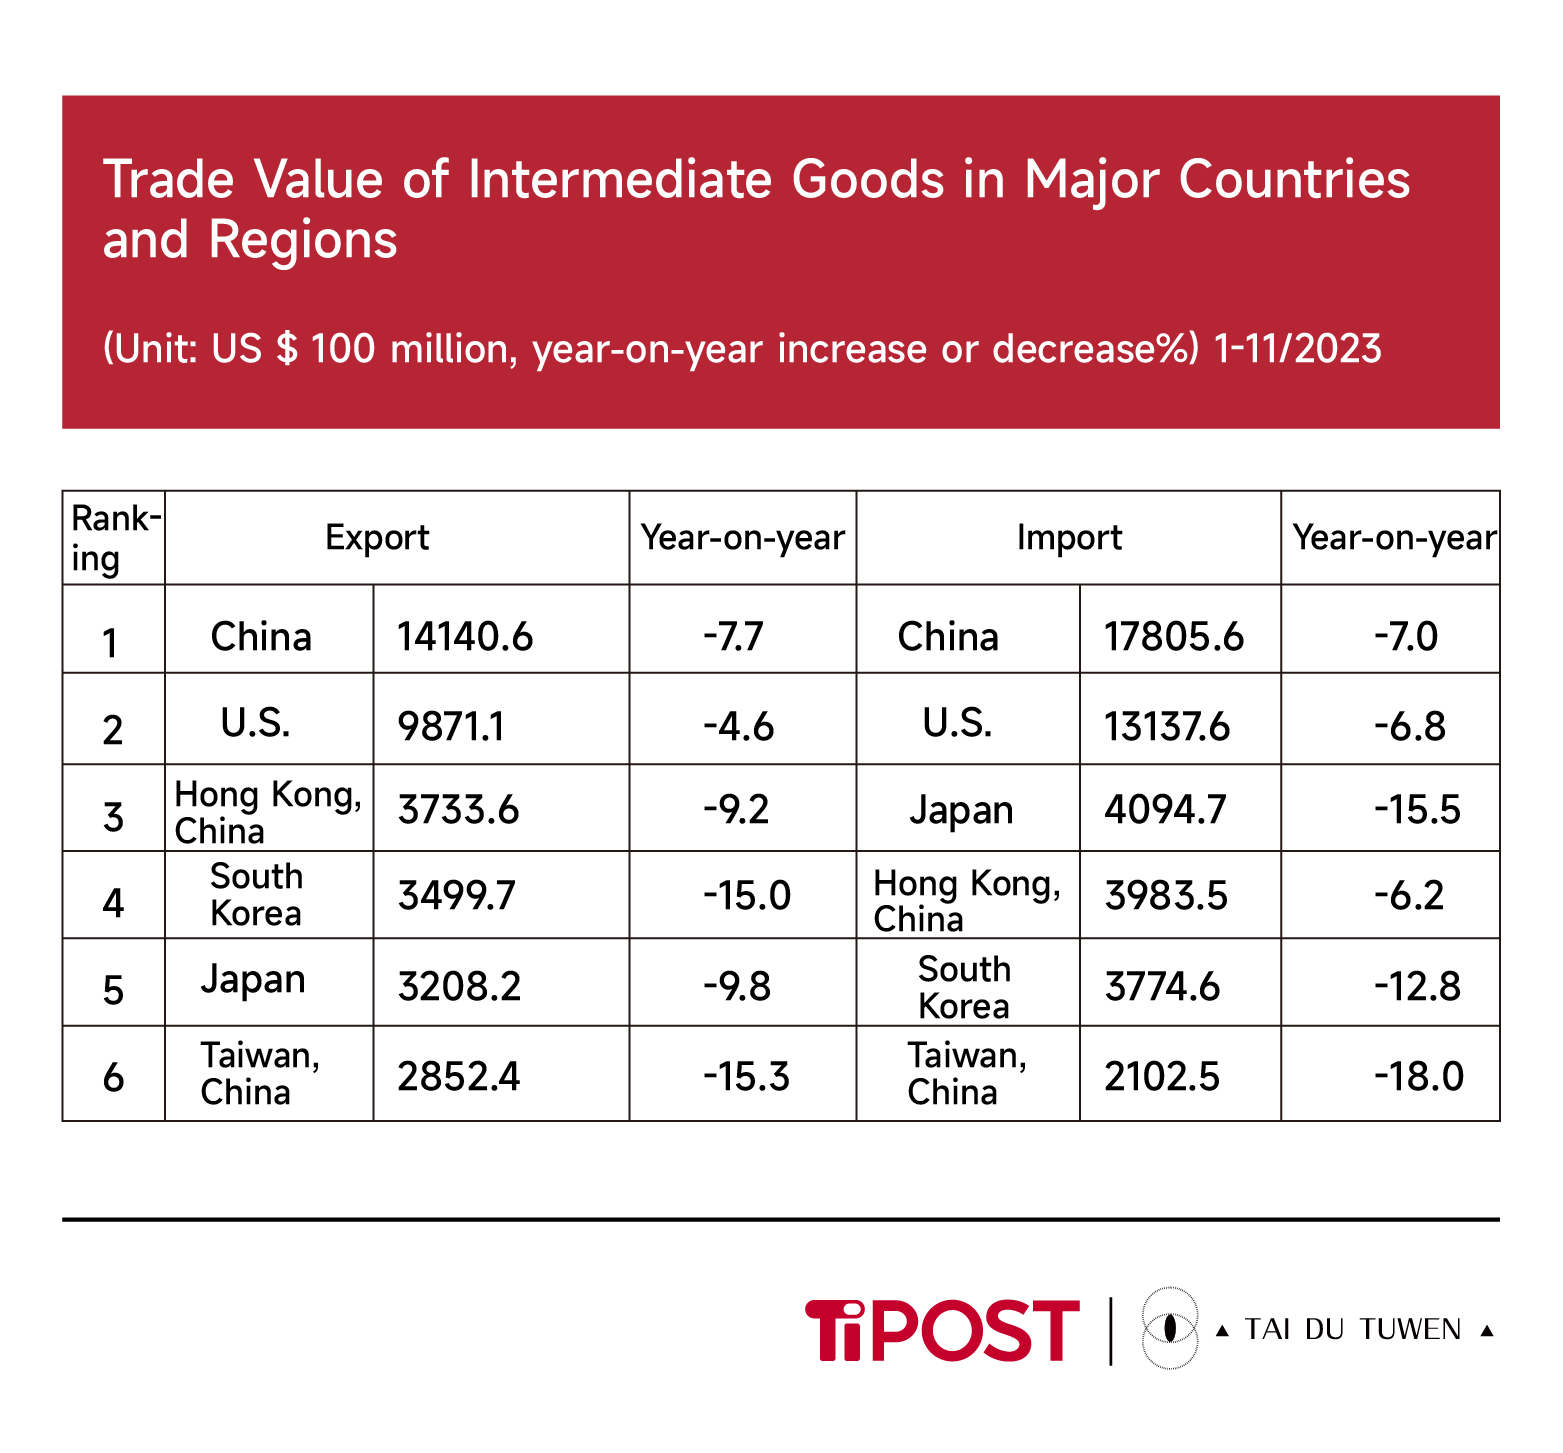 Source: GTF, cited from China International Electronic Commerce Center, Big Data Service Department of the Ministry of Commerce, Weekly Foreign Trade Observer, Issue 190.